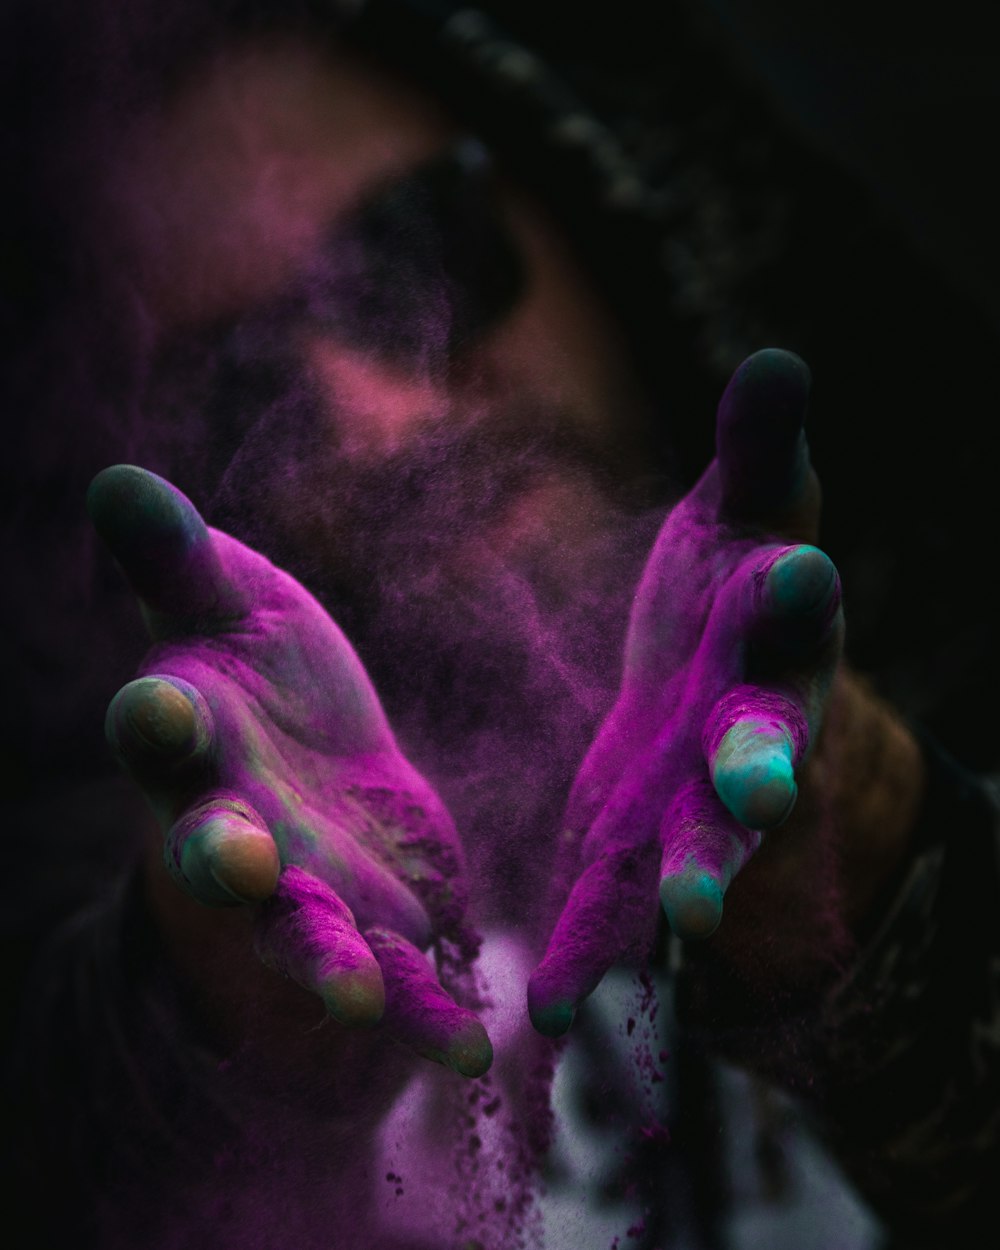 a person with their hands covered in colored powder